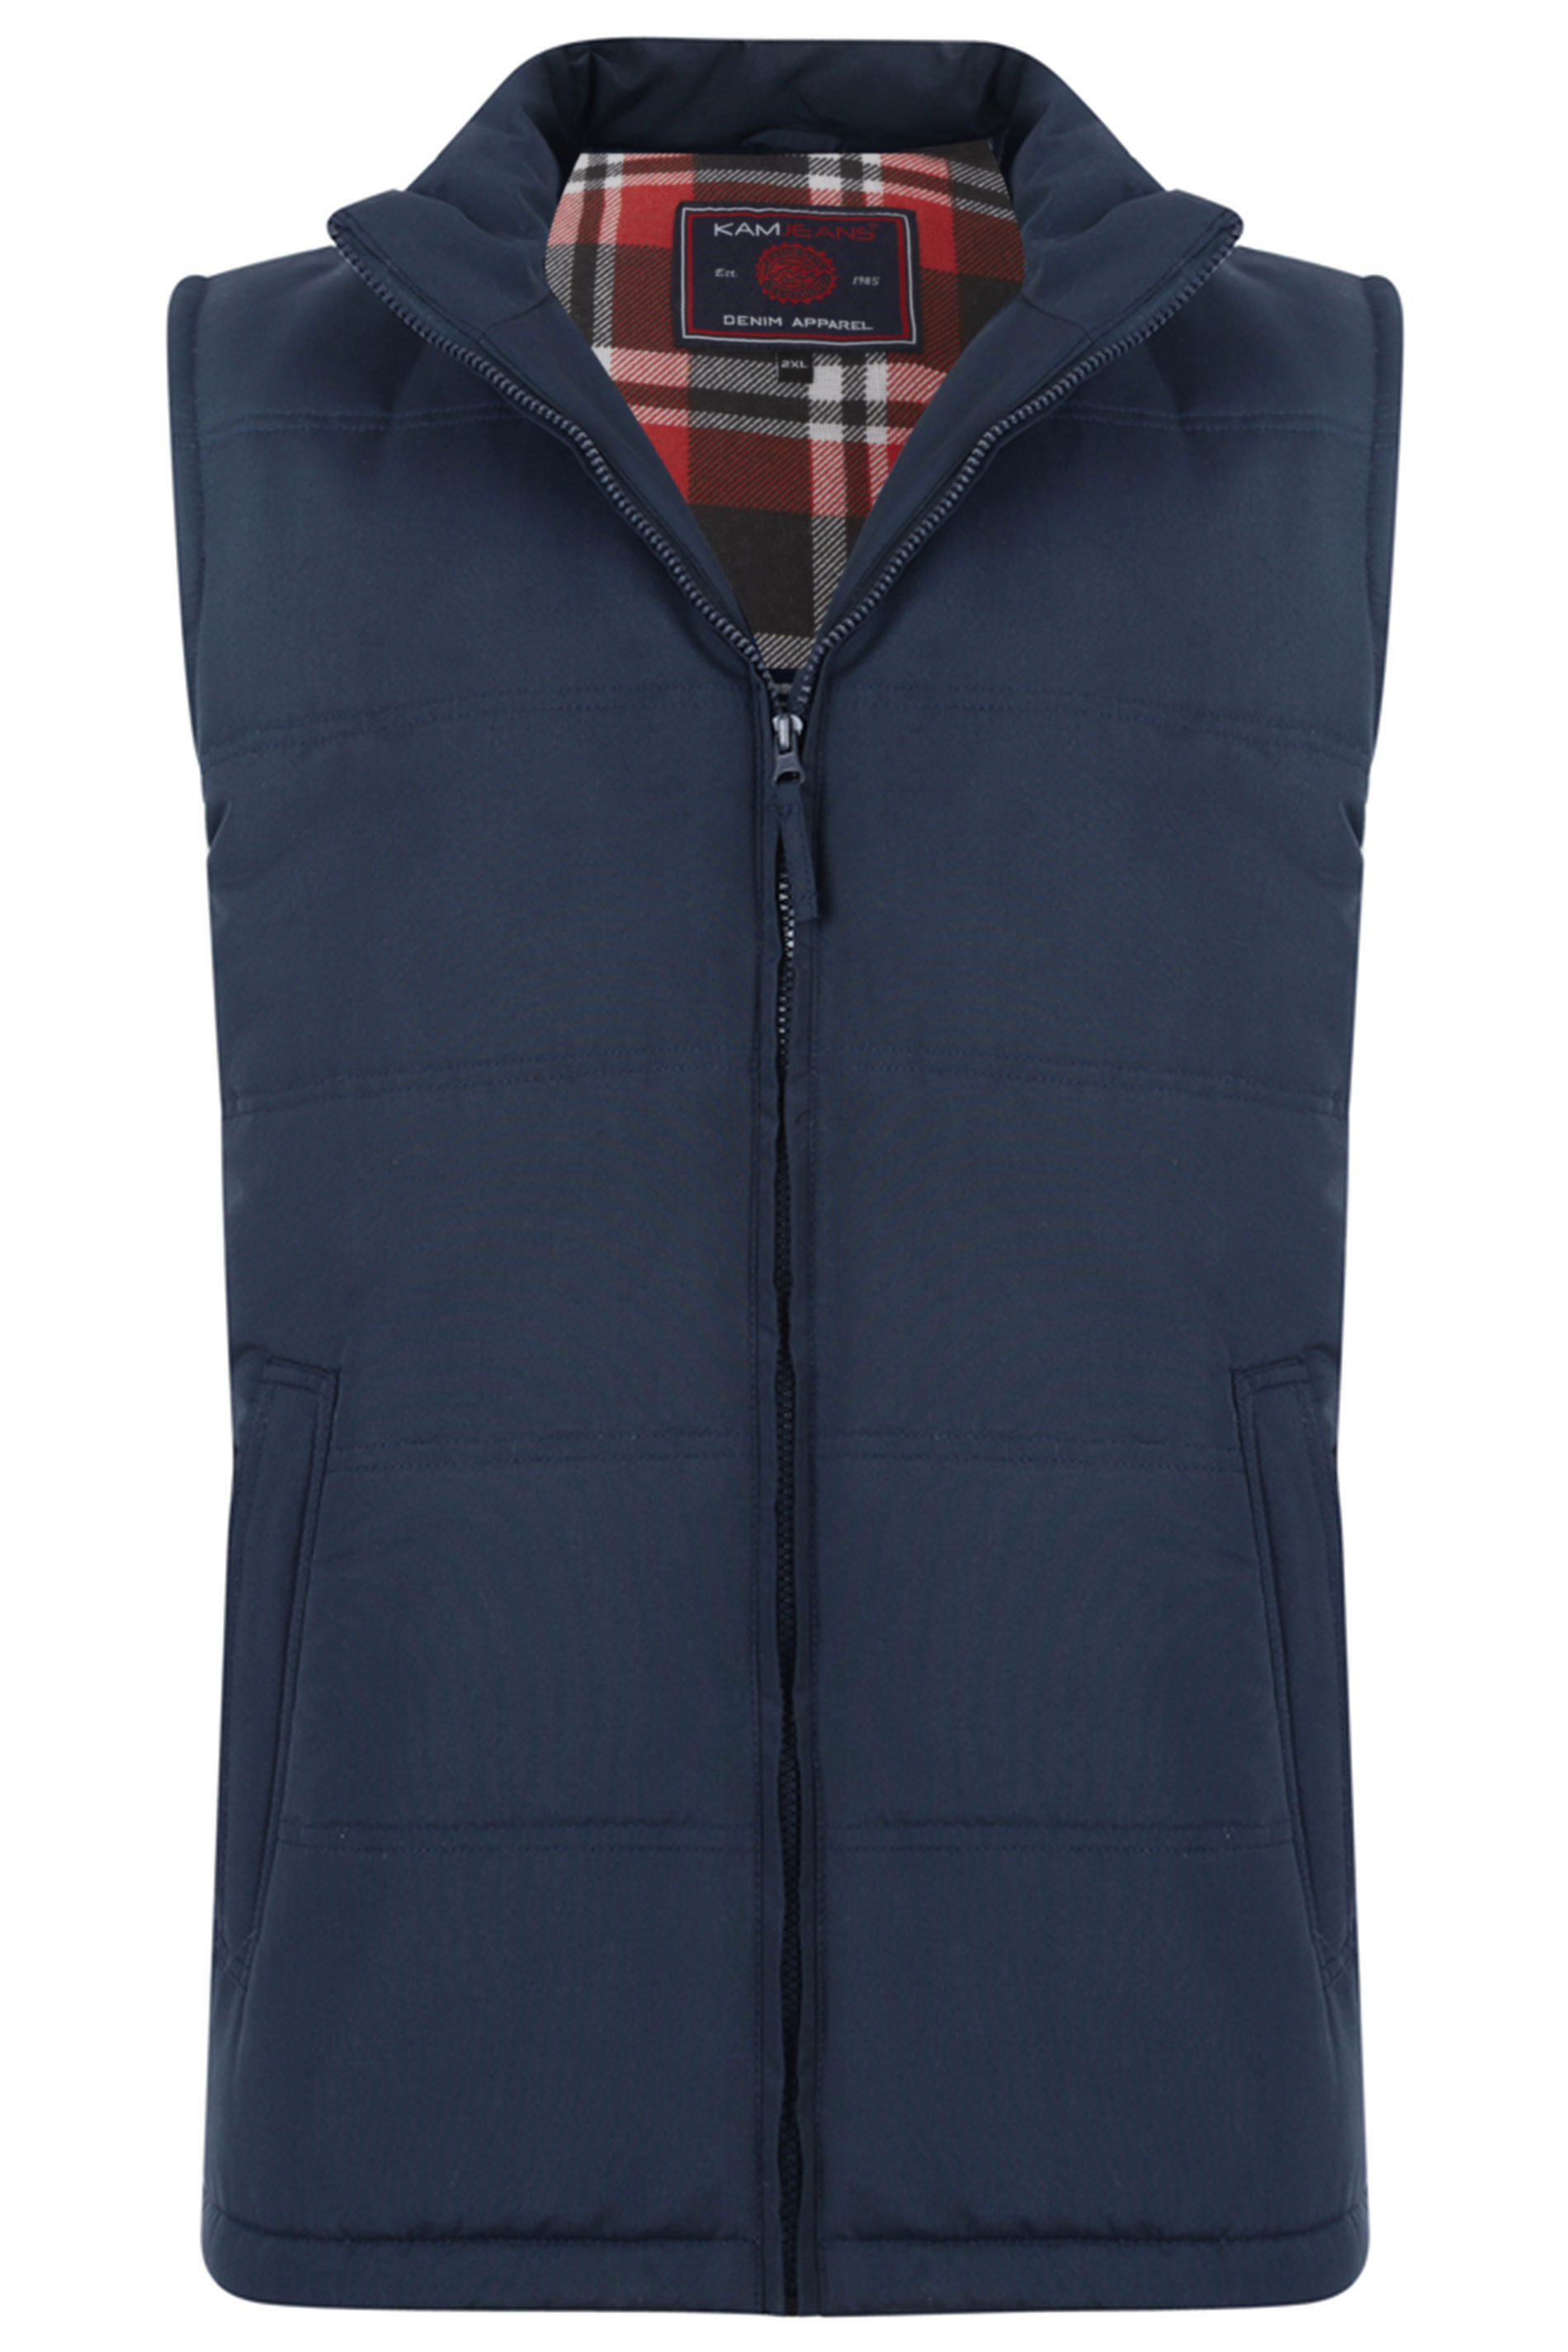 KAM Navy Blue Quilted Gilet | BadRhino 2